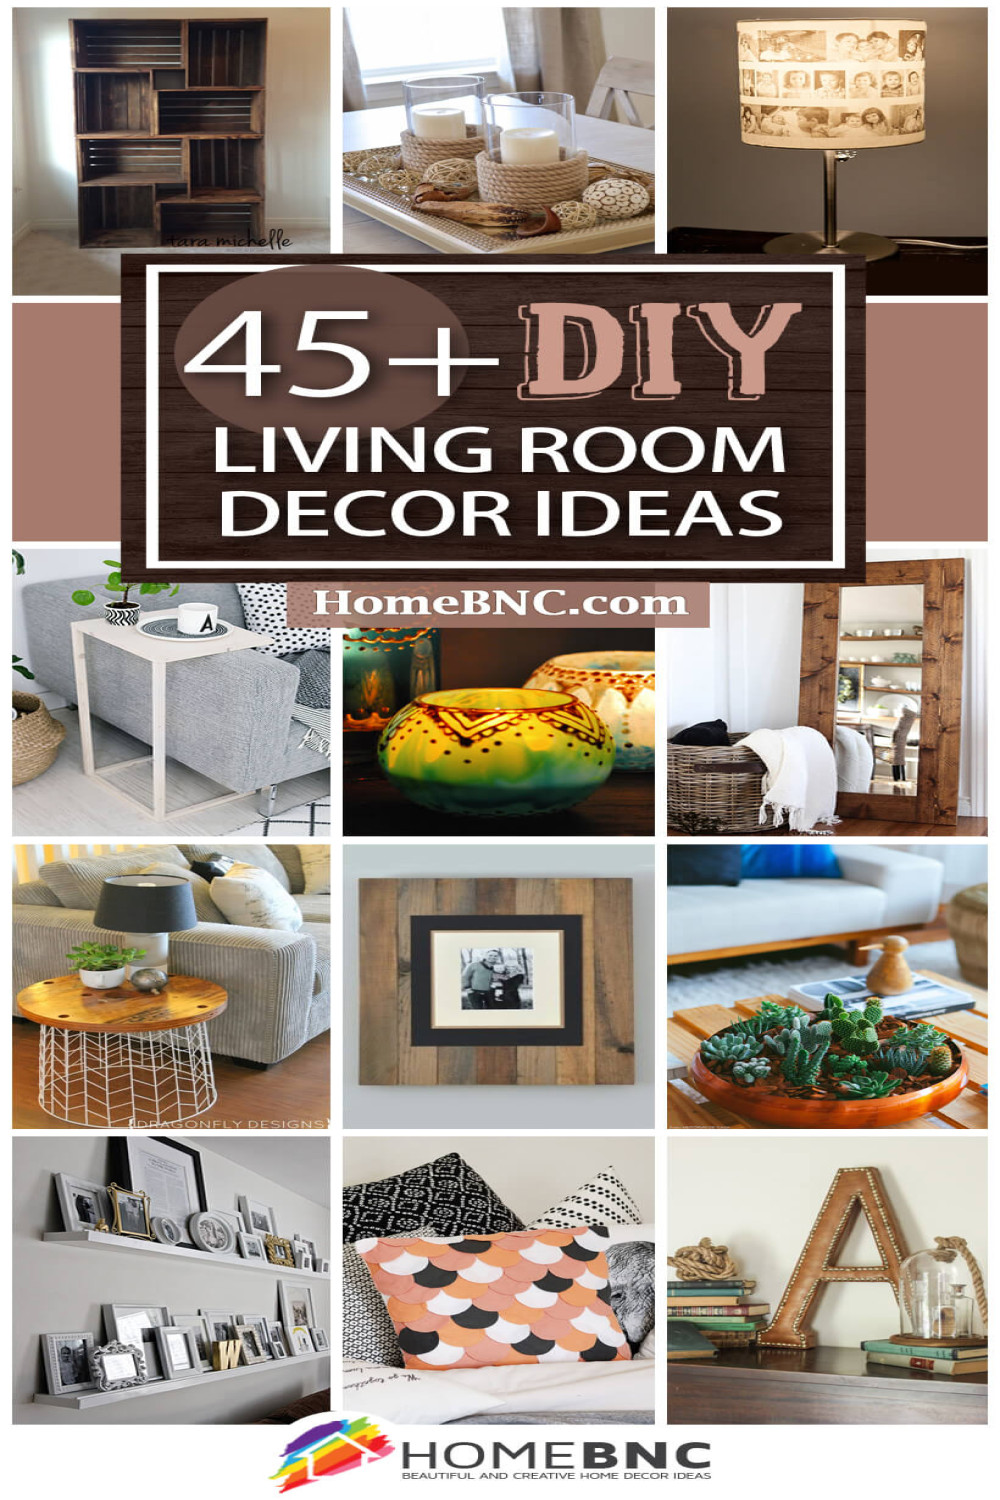 + Best DIY Living Room Decorating Ideas and Designs for